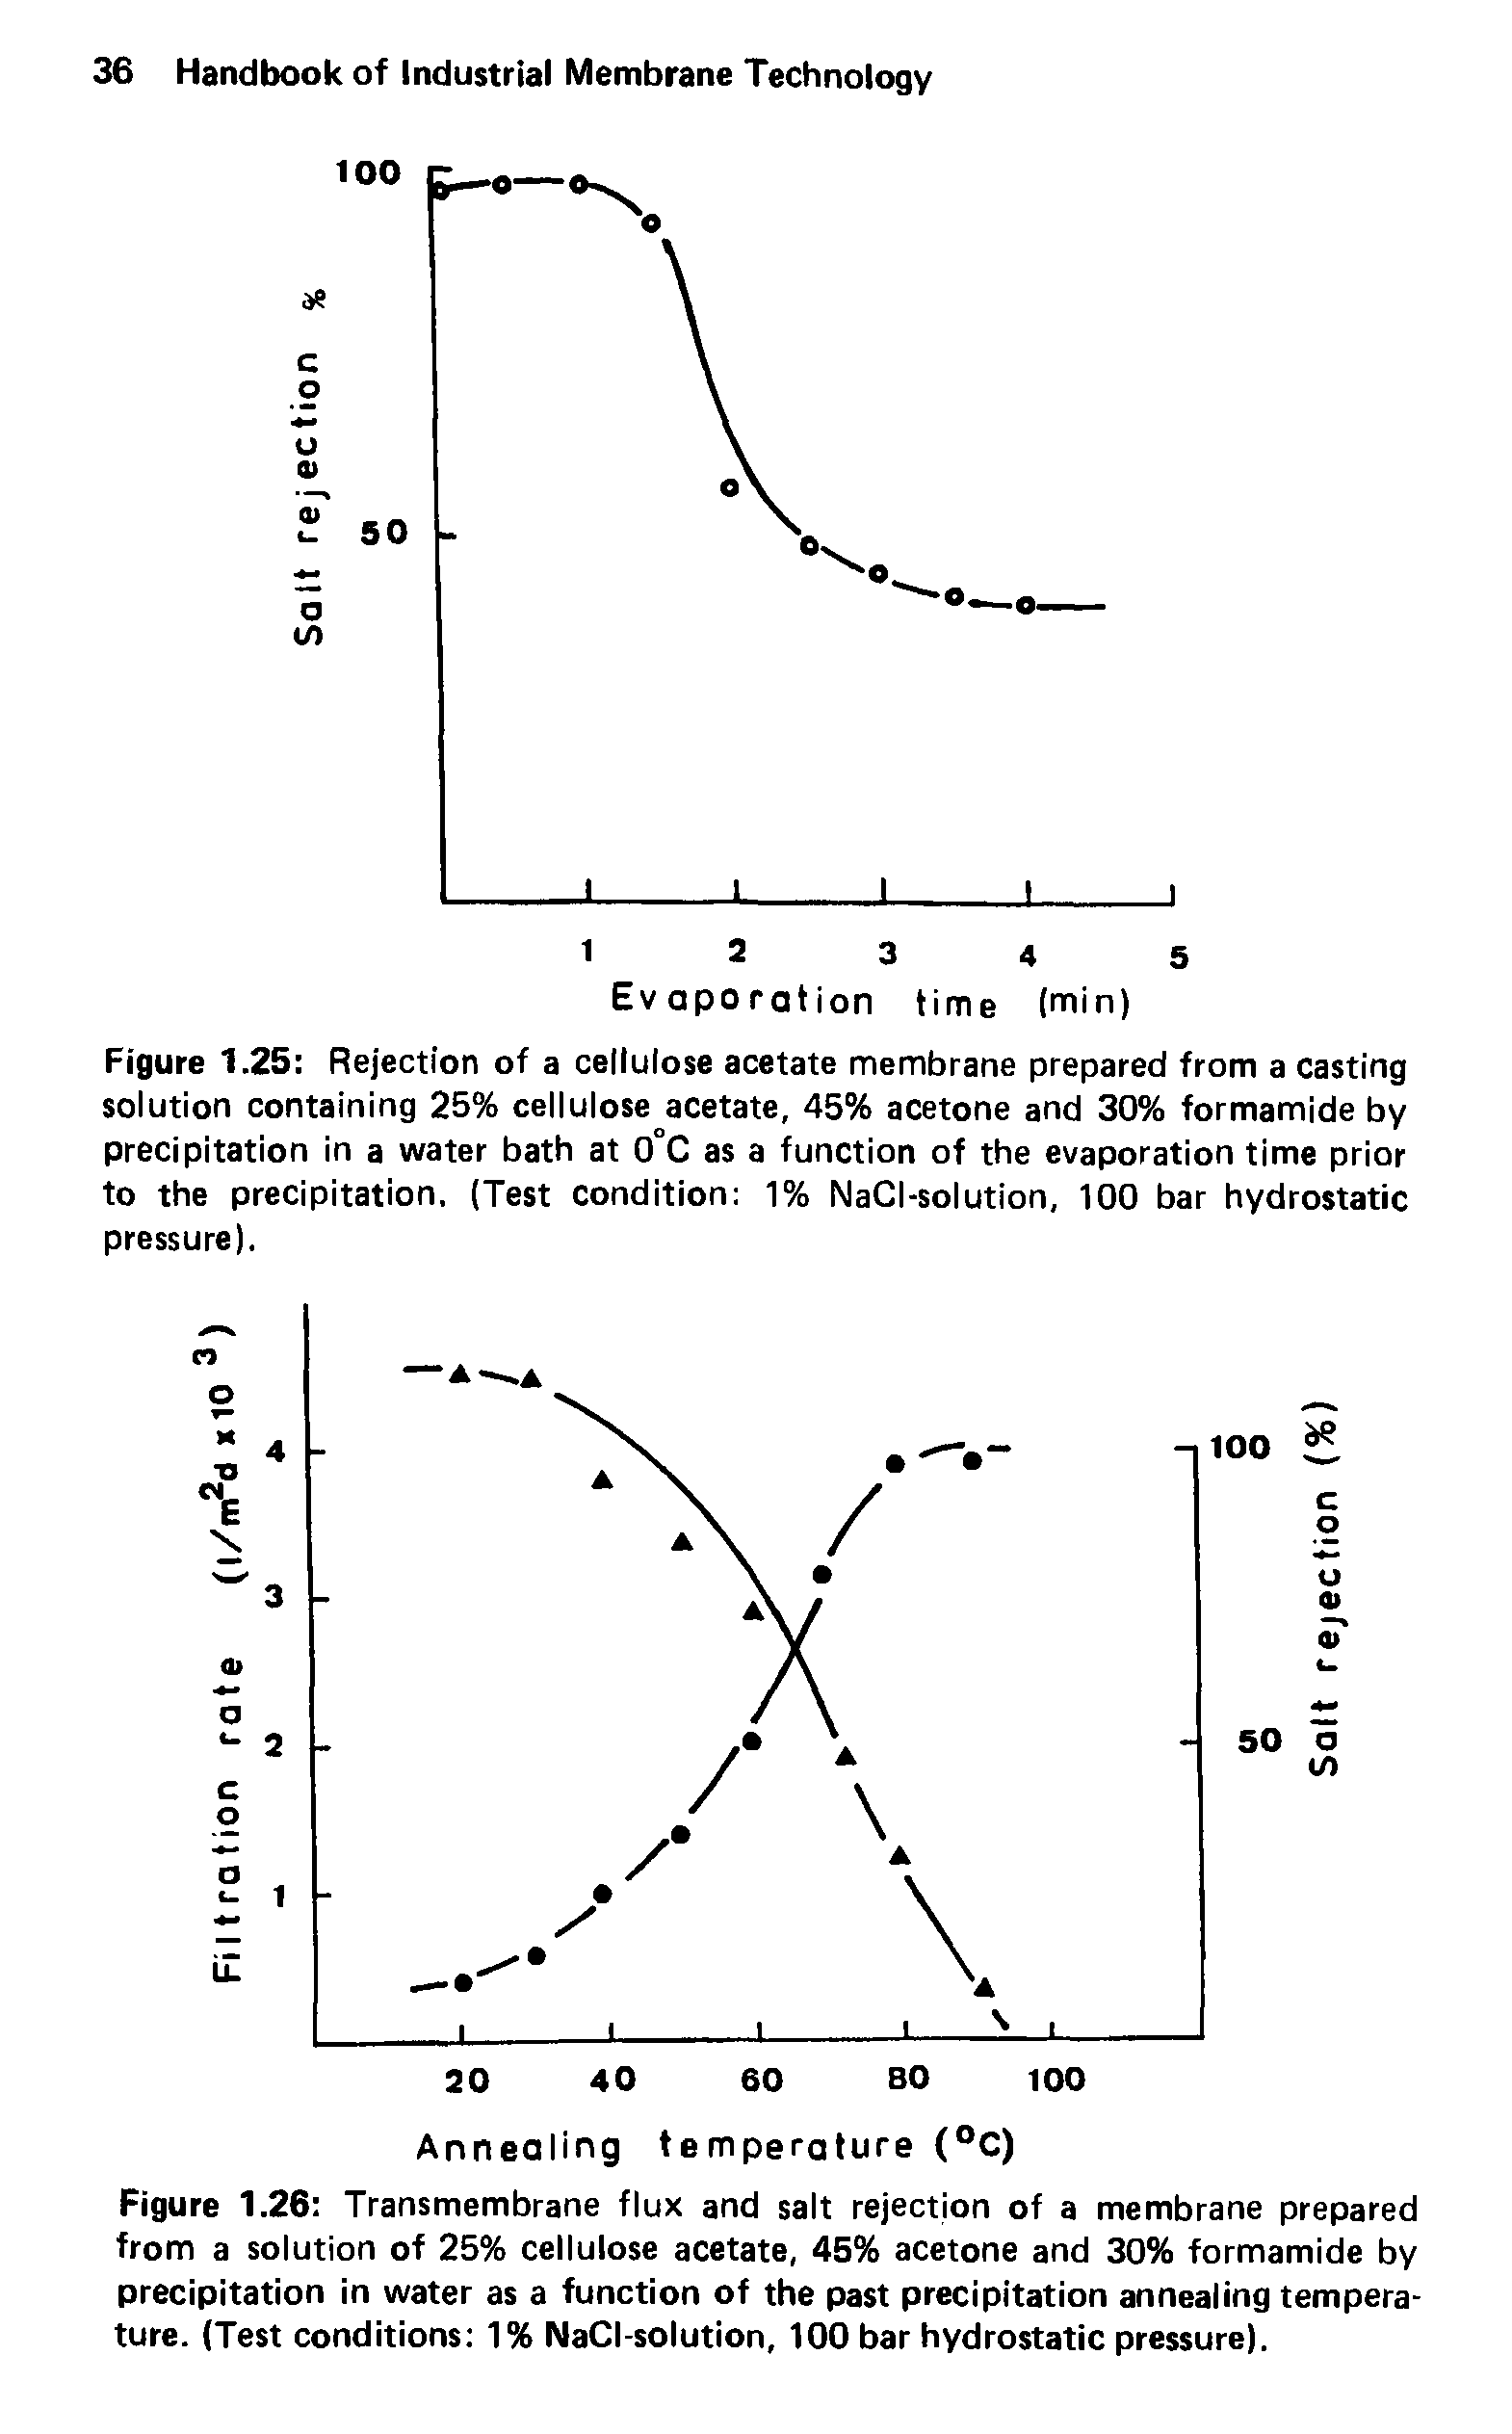 Figure 1.26 Transmembrane flux and salt rejection of a membrane prepared from a solution of 25% cellulose acetate, 45% acetone and 30% formamide by precipitation in water as a function of the past precipitation annealing temperature. (Test conditions 1% NaCI-solution, 100 bar hydrostatic pressure).